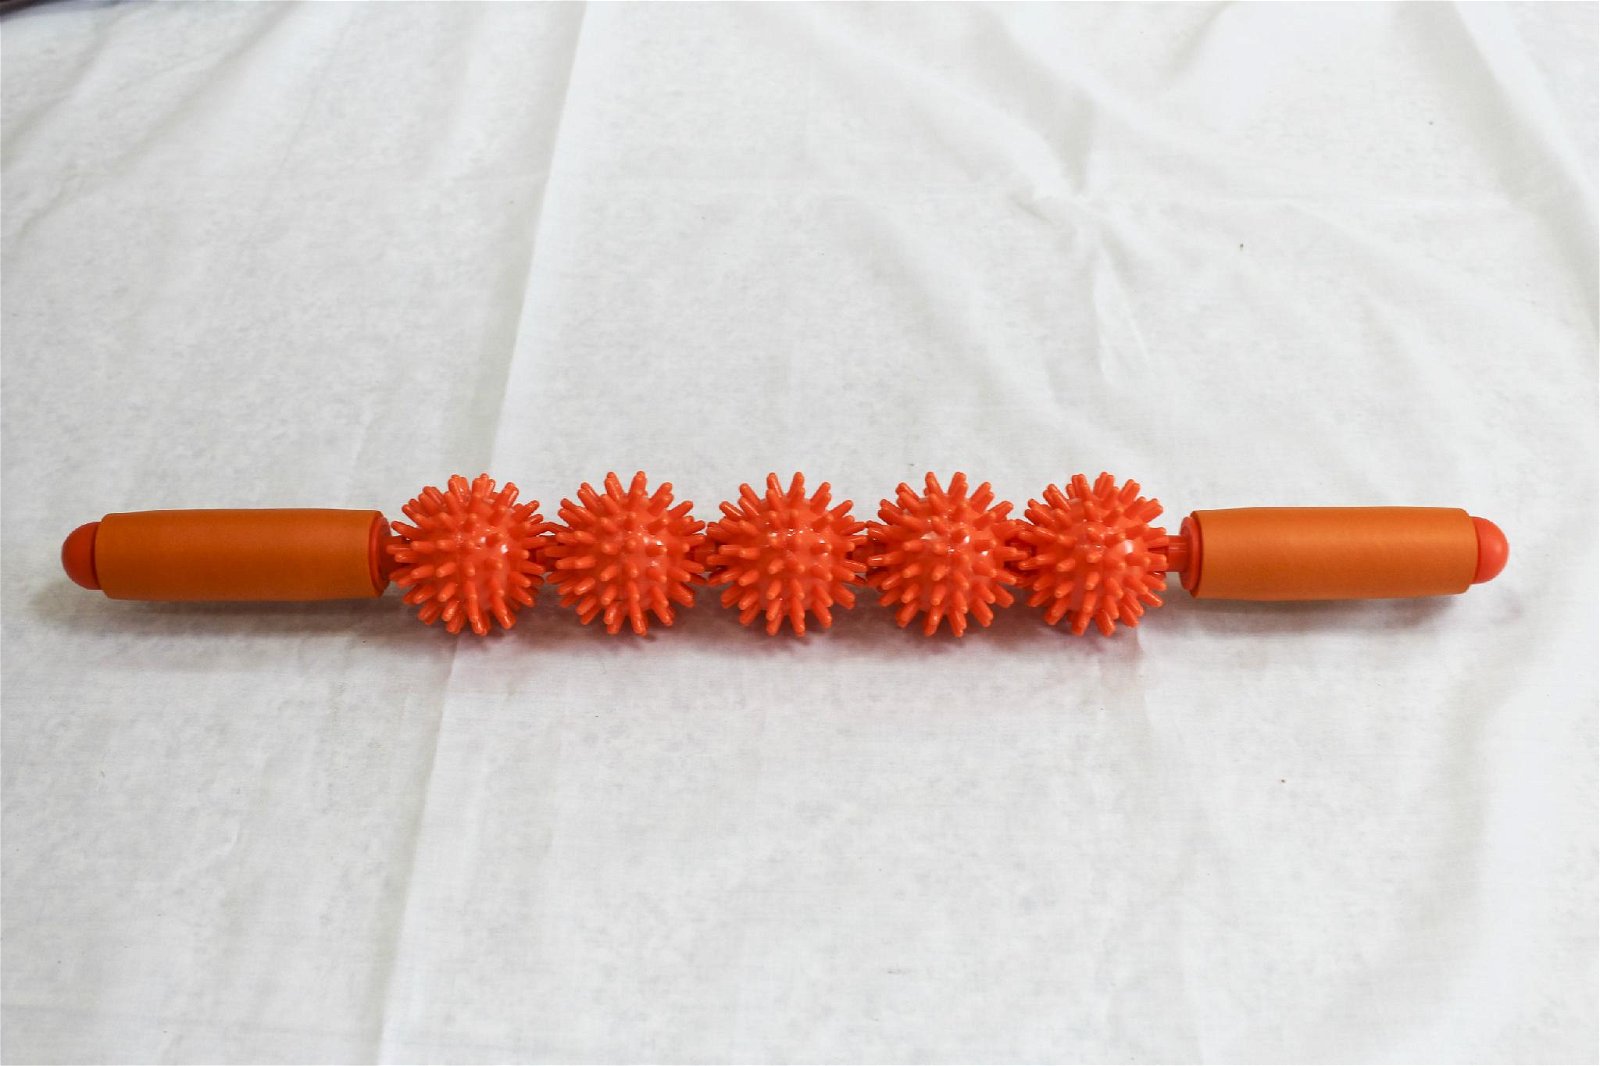 Muscle Massage Stick For Relief 2